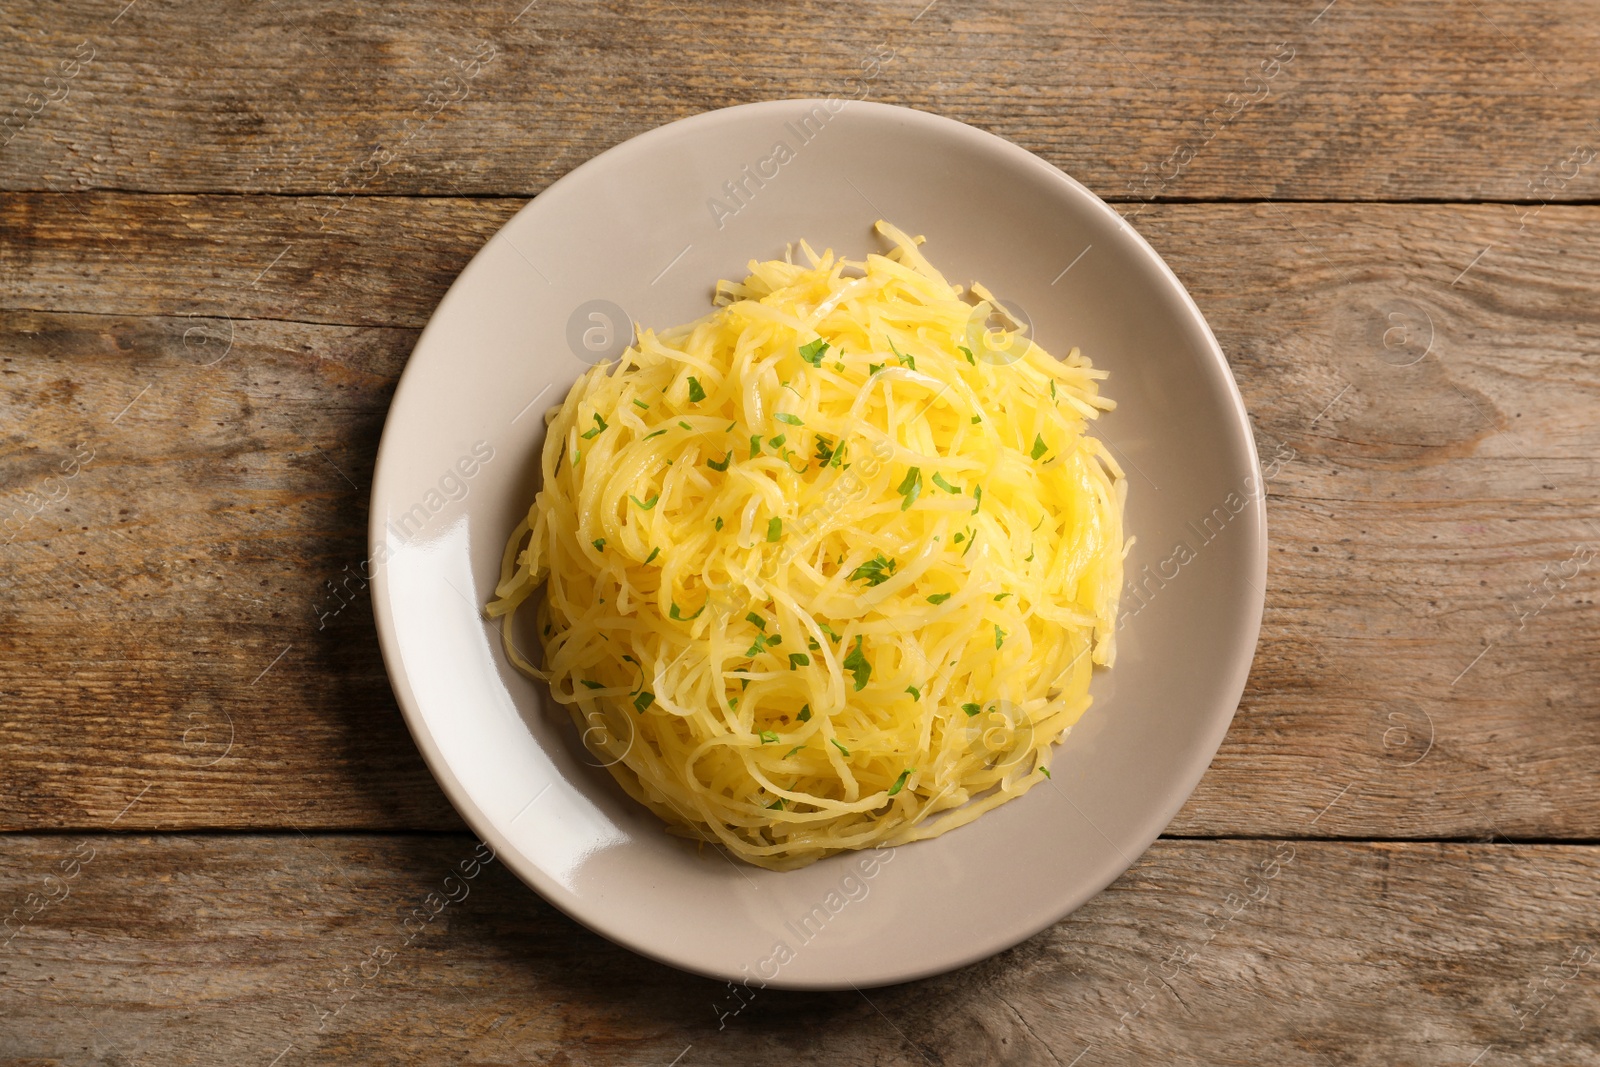 Photo of Plate with cooked spaghetti squash on wooden table, top view